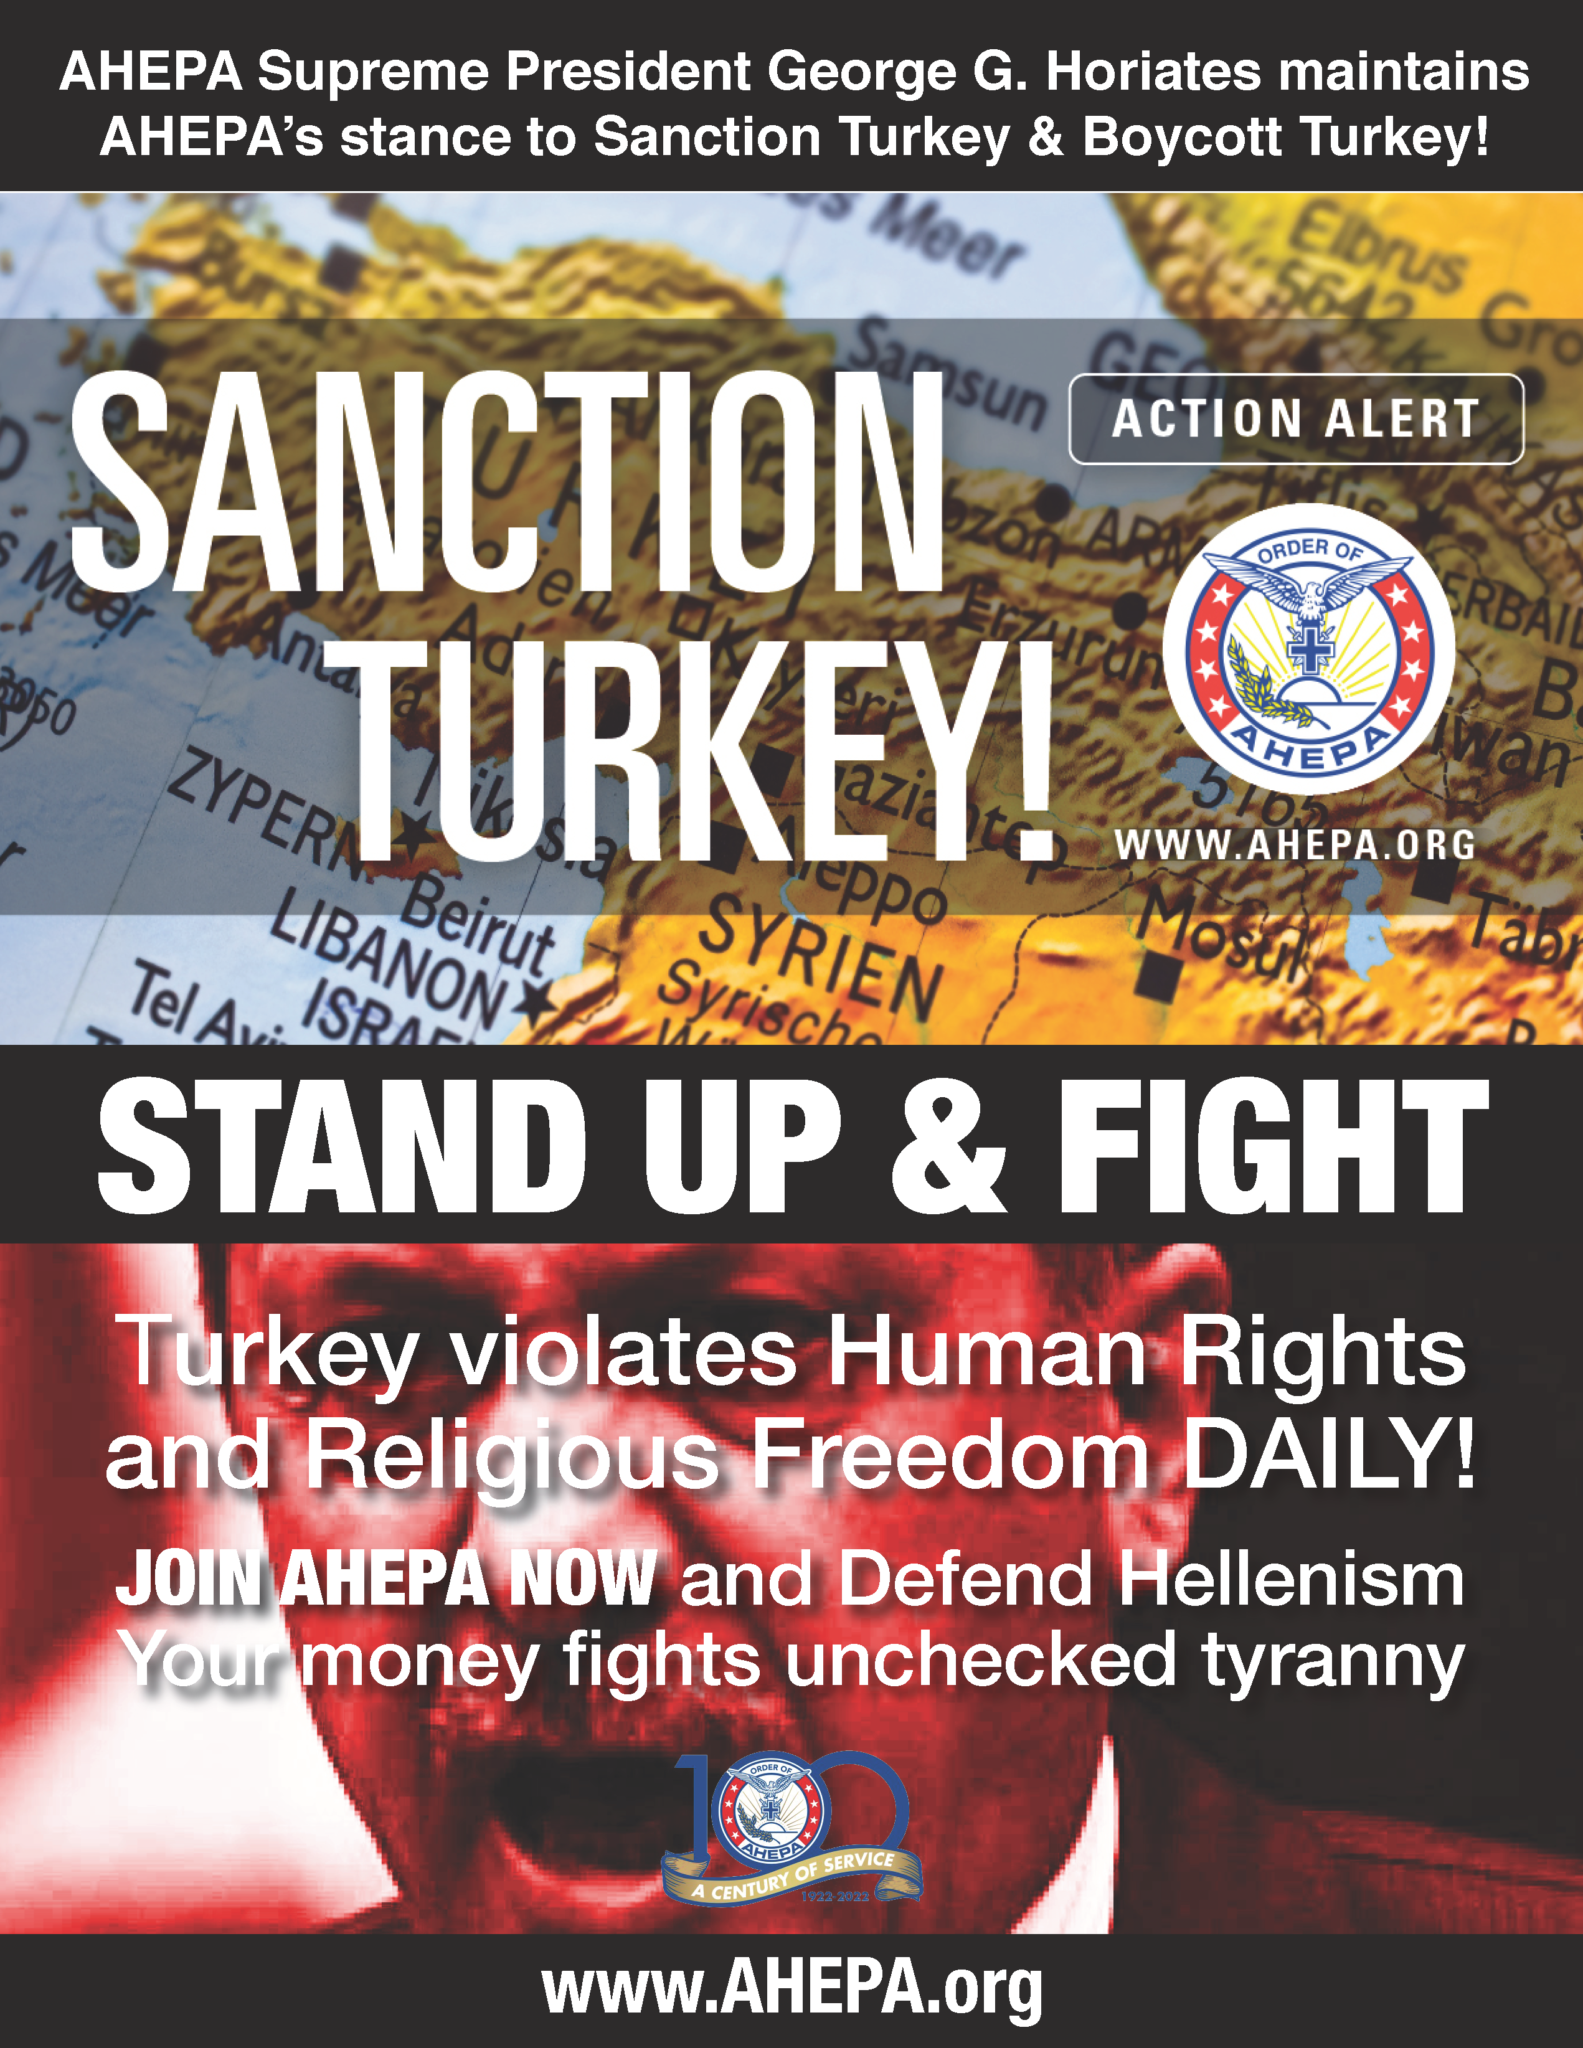 Sanction Turkey! Stand Up and Fight!